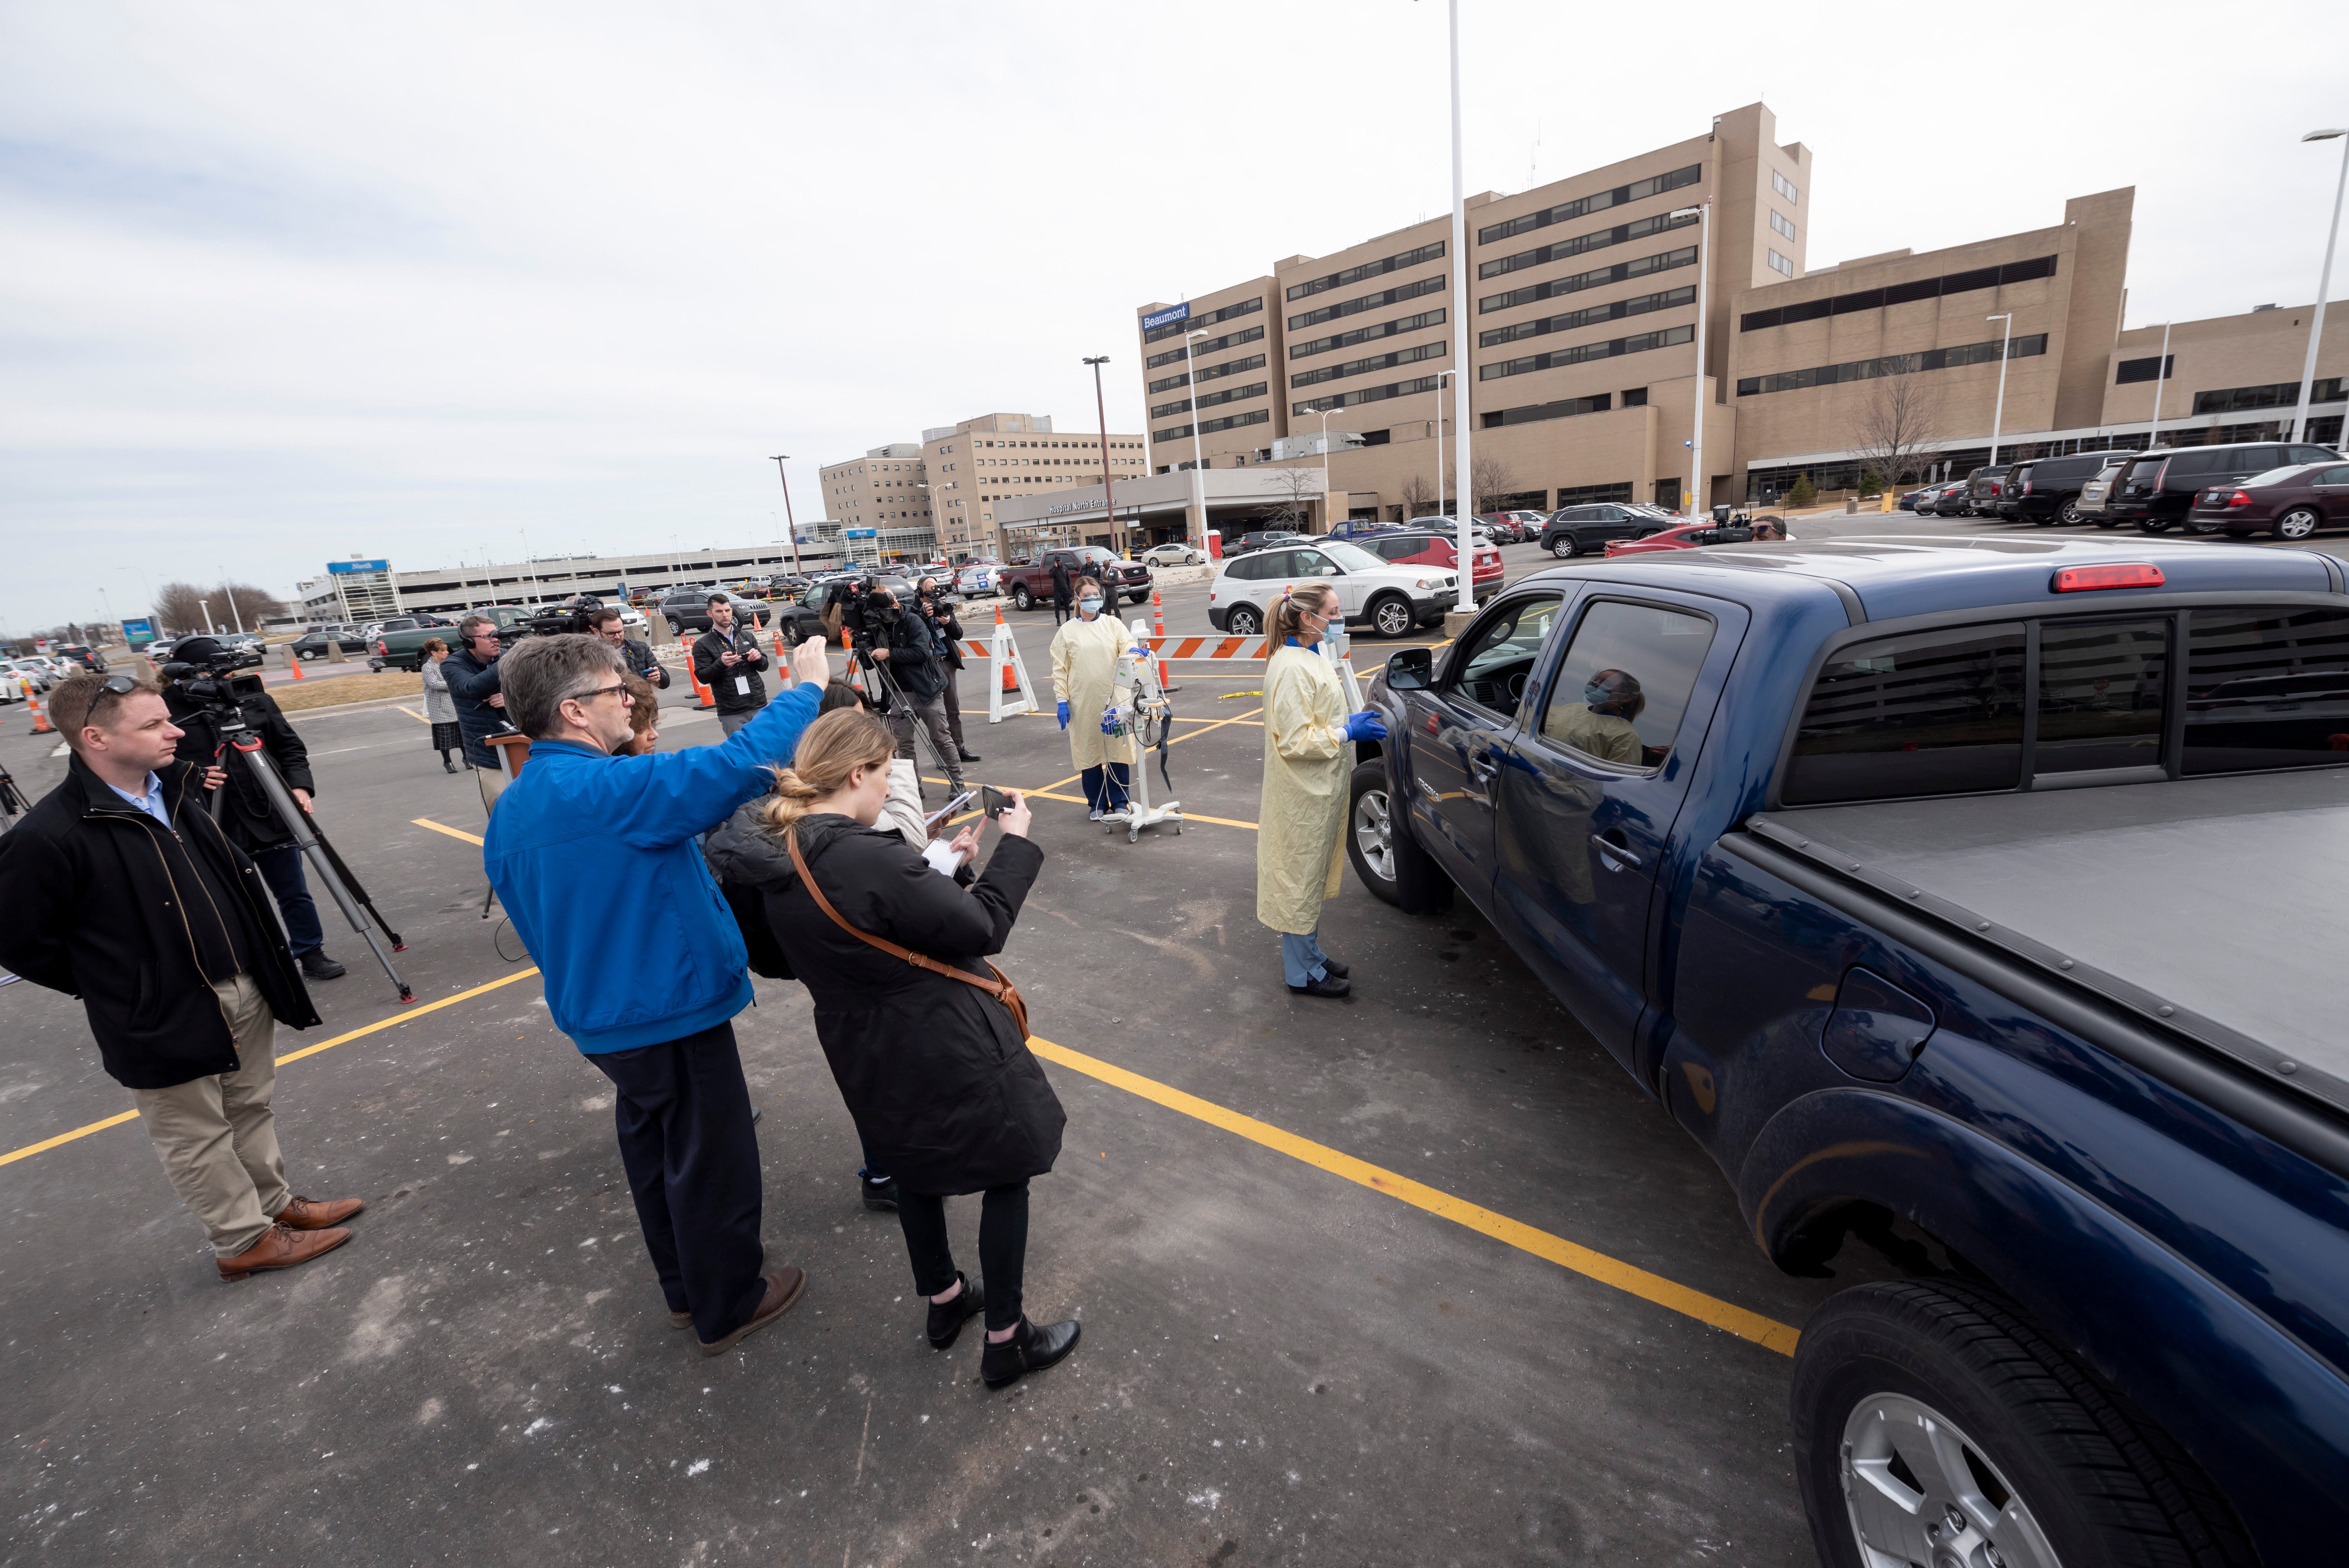 Members of the media record a demonstration of the drive-up screening process for the coronavirus at Beaumont hospital in Royal Oak, March 16, 2020. People concerned that they may be infected with the coronavirus are able to get screening done from their vehicles without entering the hospital.